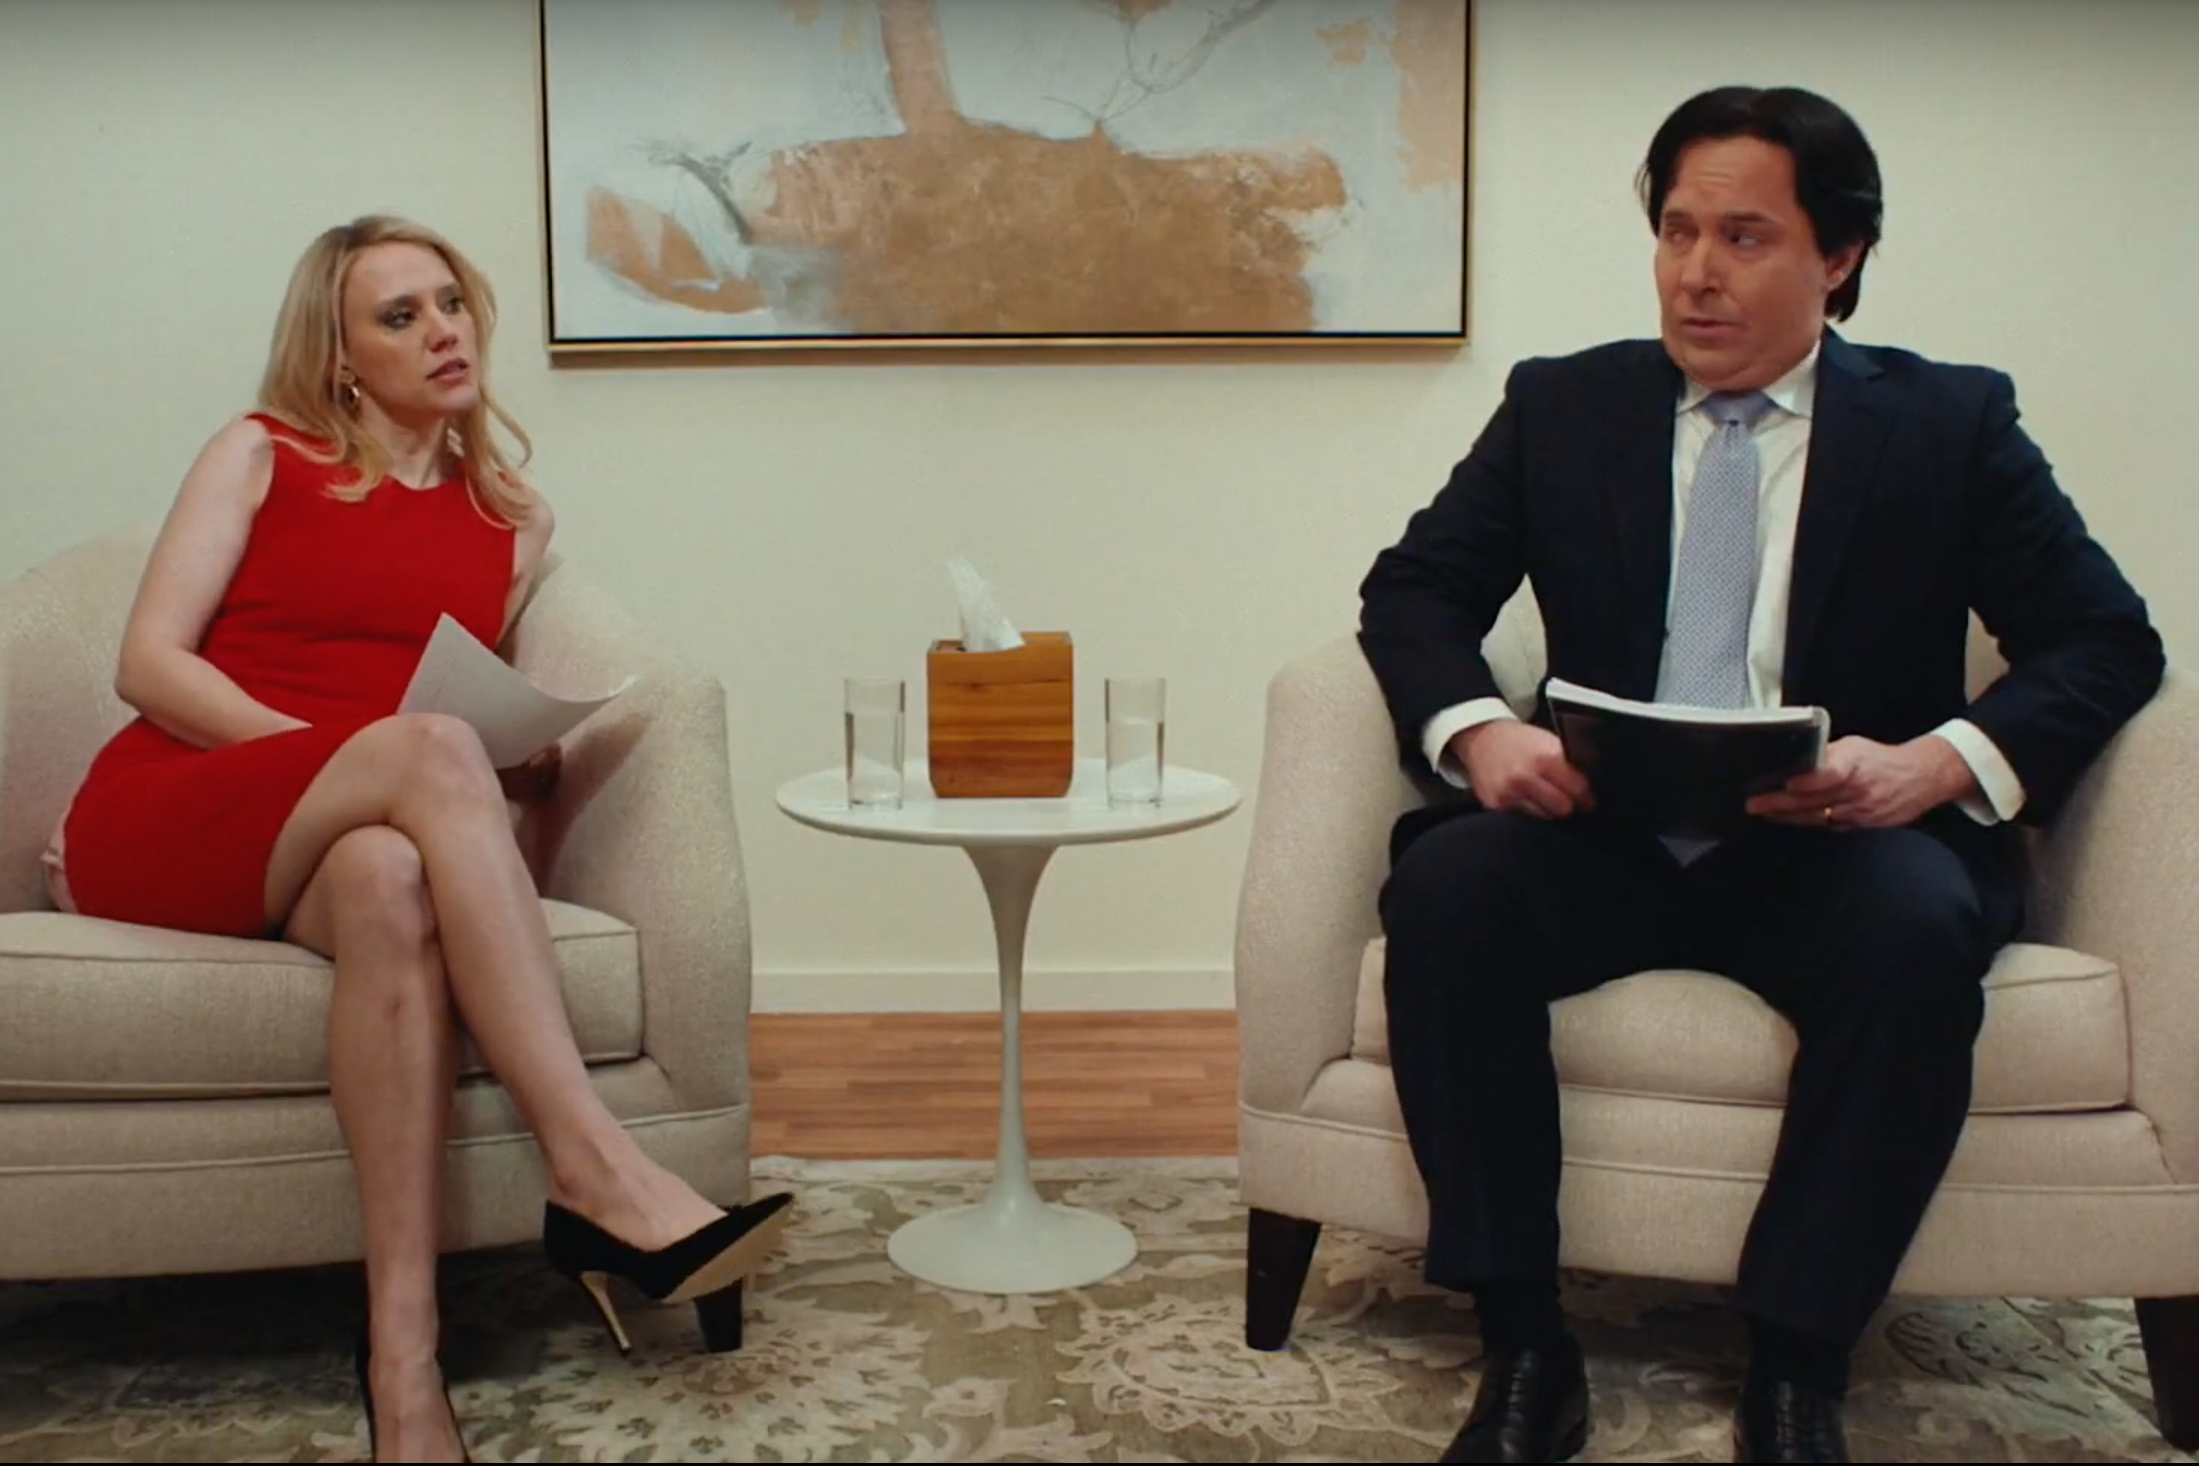 Watch “Saturday Night Live” Spoof Kellyanne Conway in “Marriage Story” Sketch